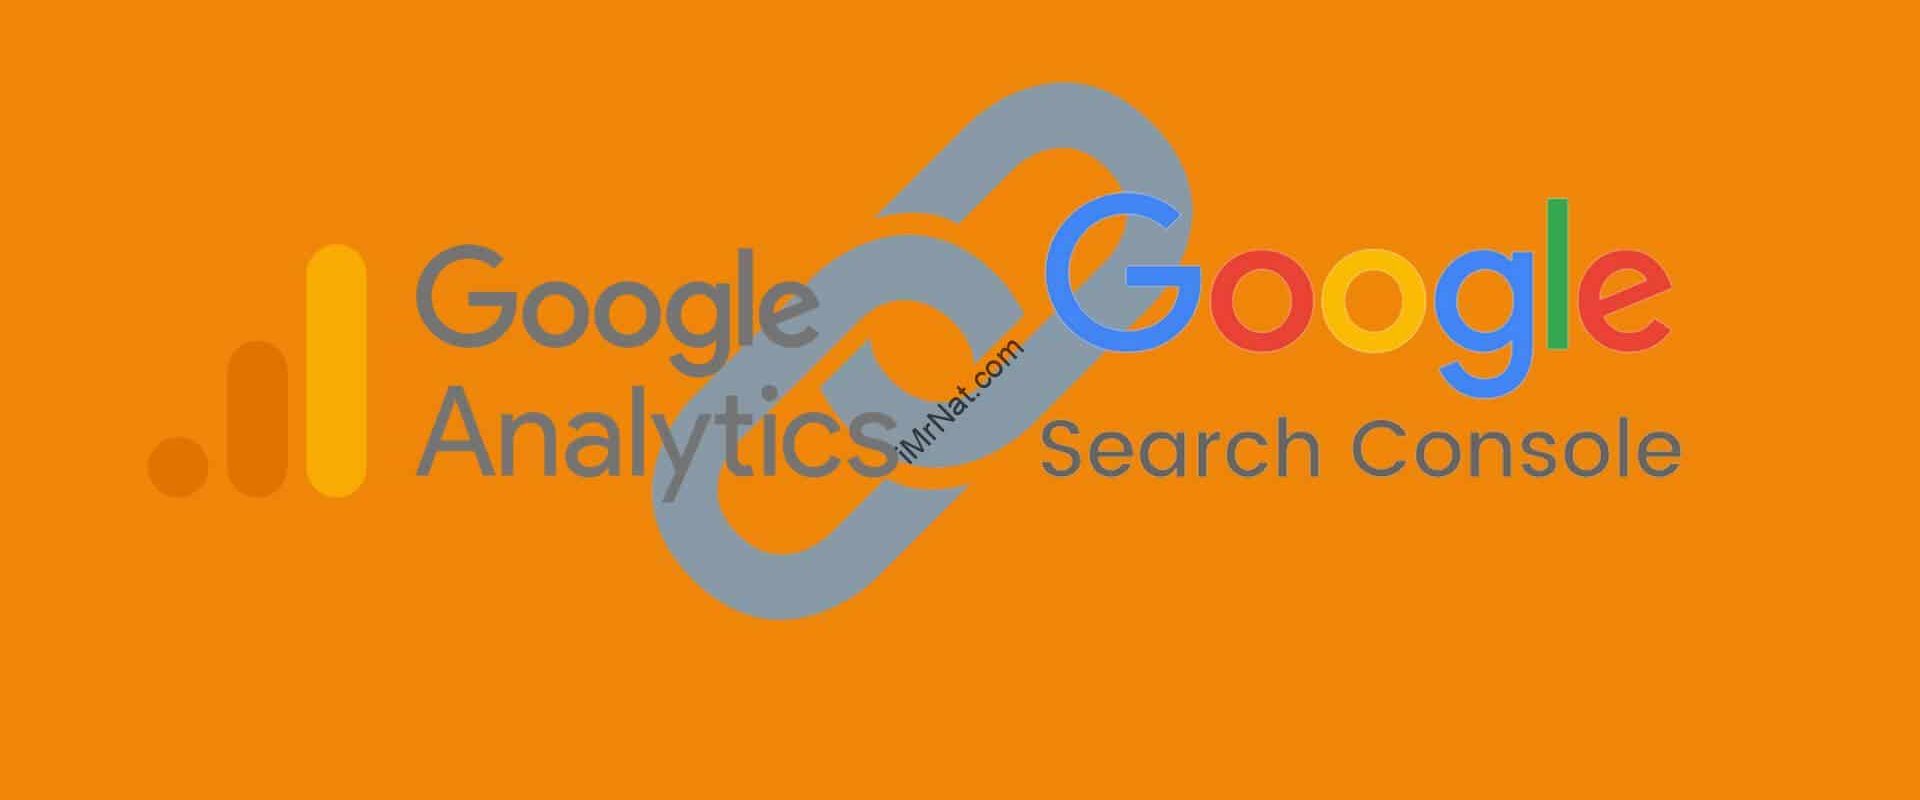 connect google analytics with search console